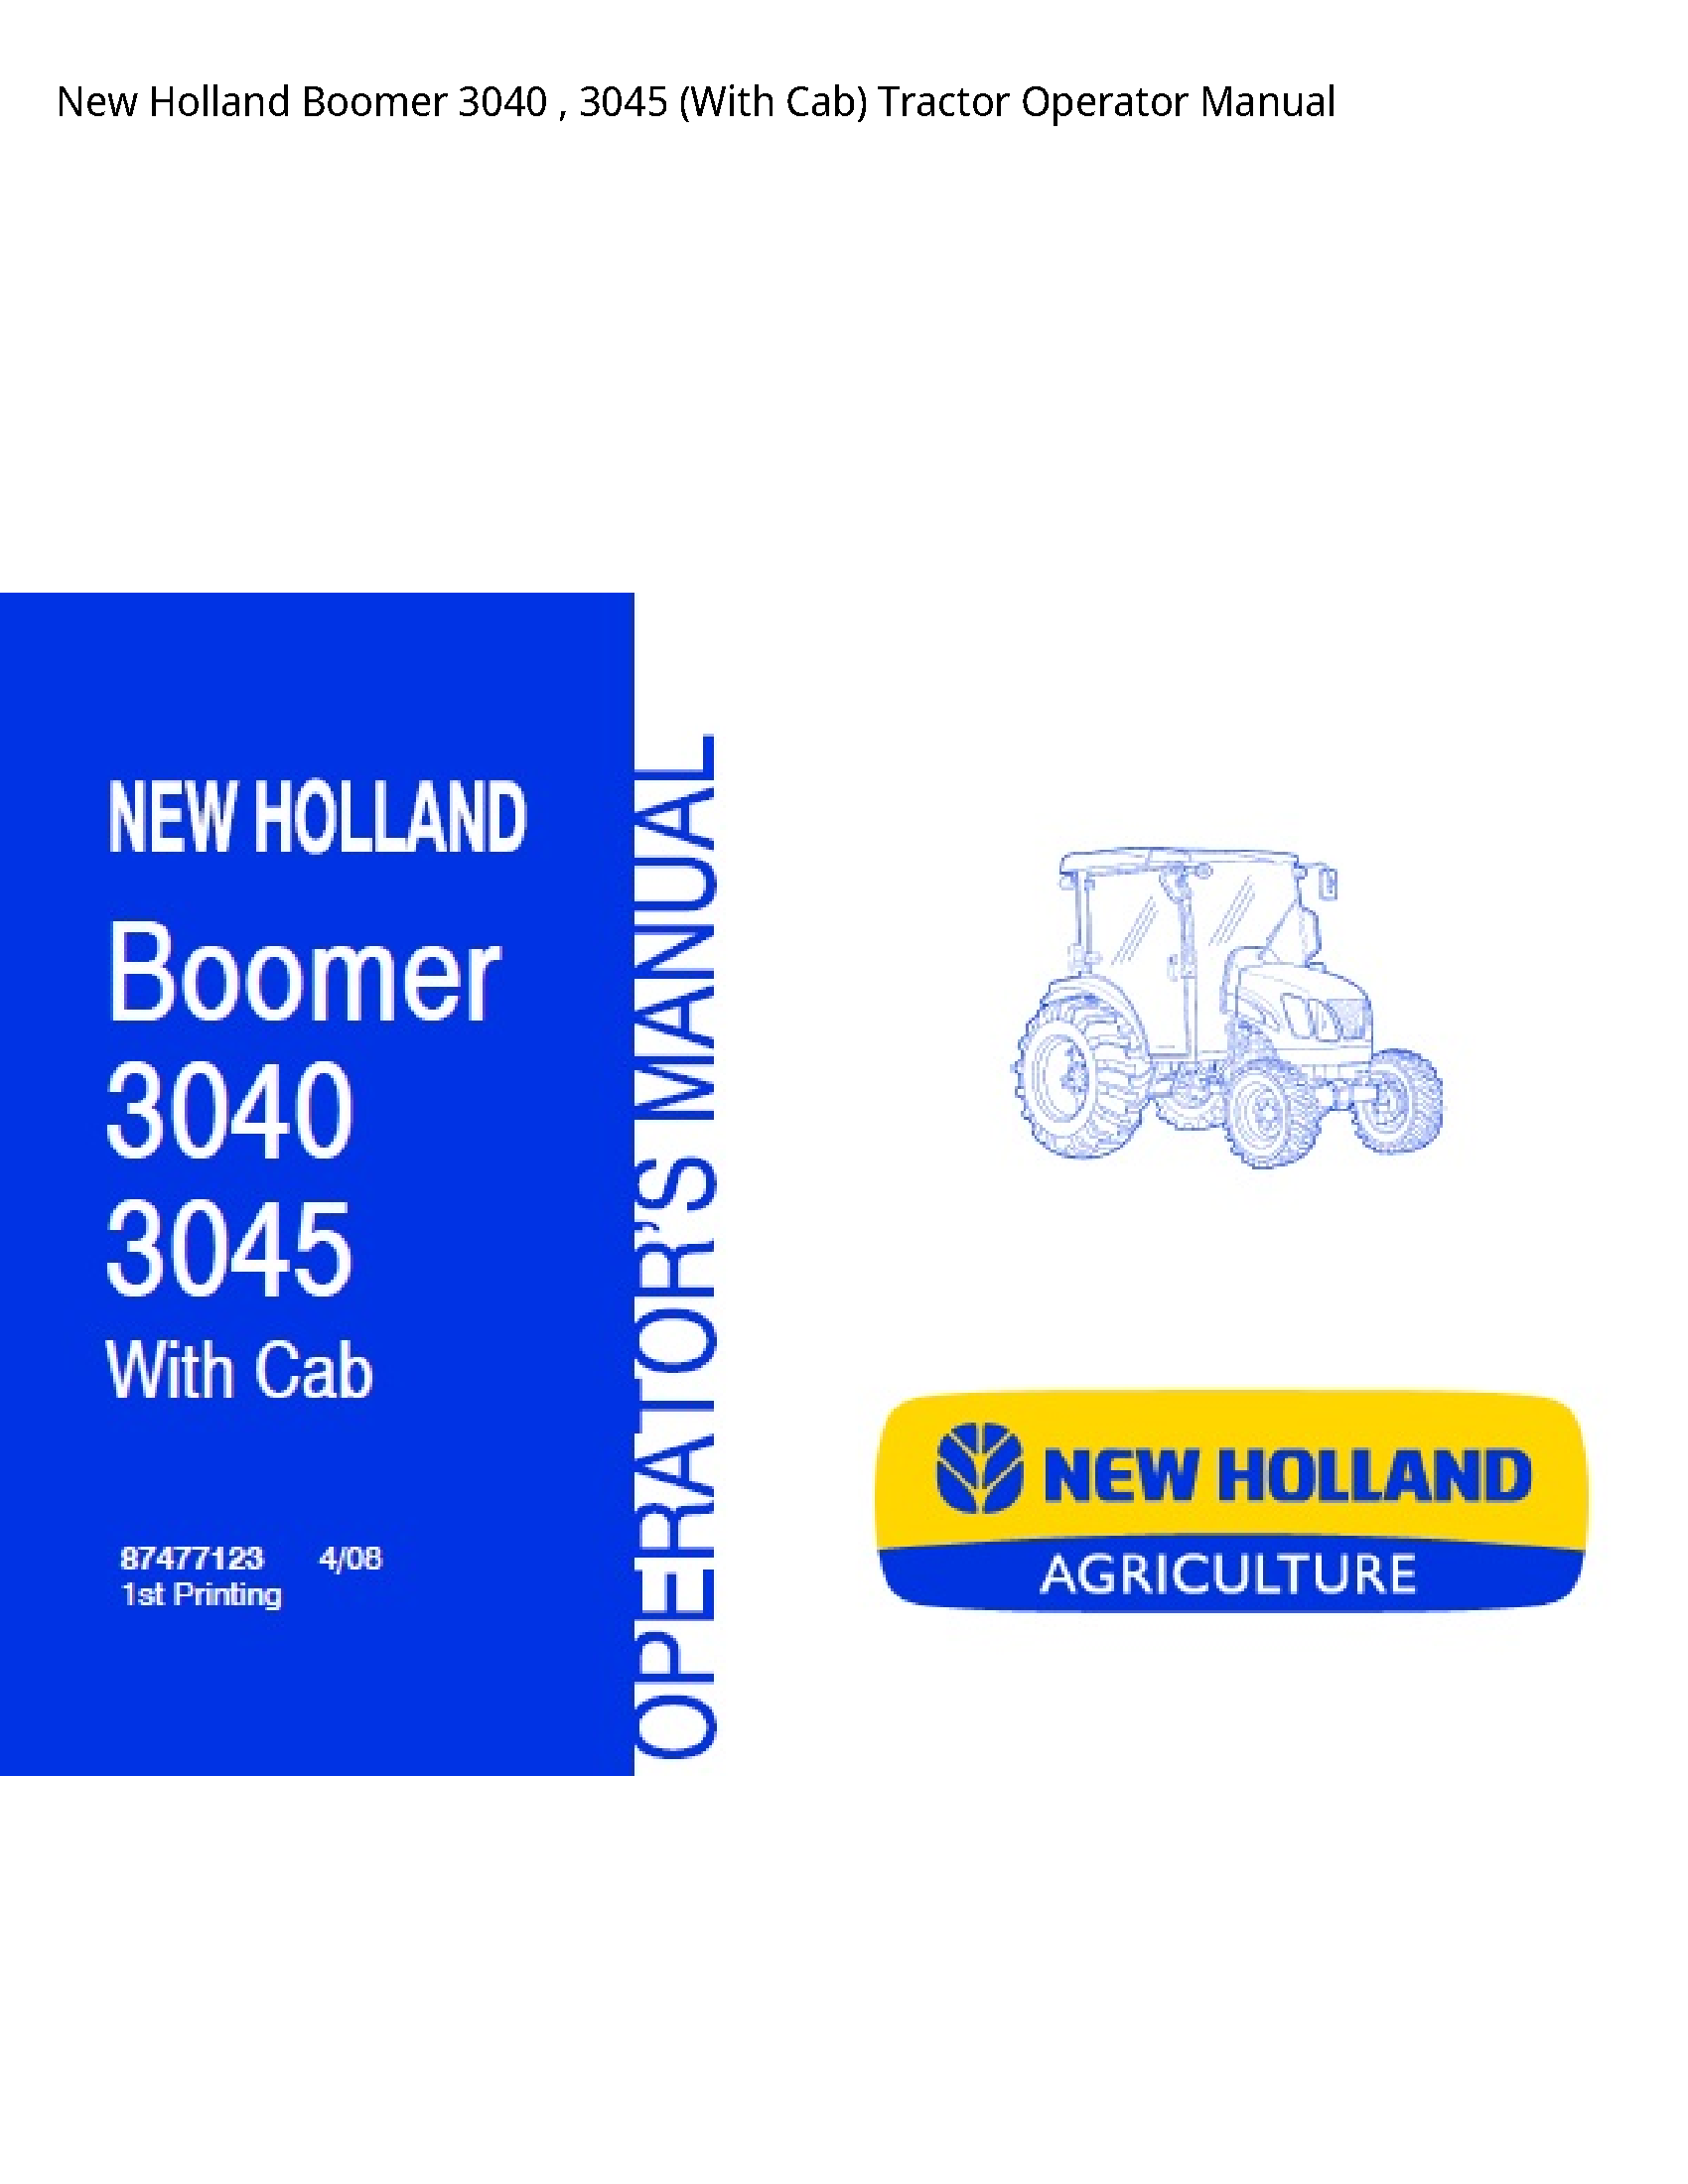 New Holland 3040 Boomer (With Cab) Tractor Operator manual